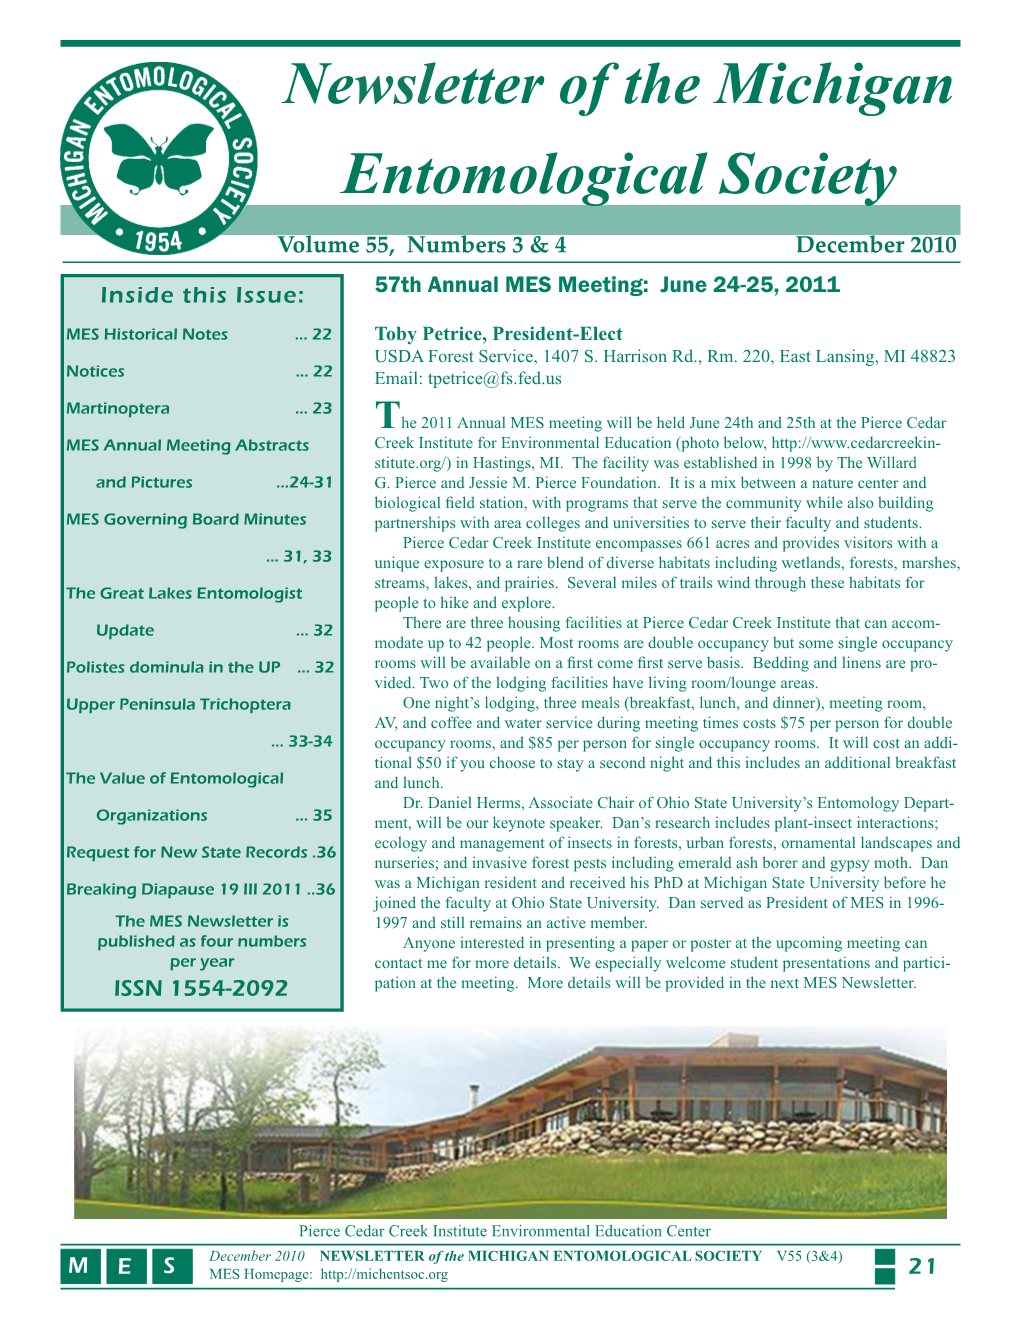 Newsletter of the Michigan Entomological Society